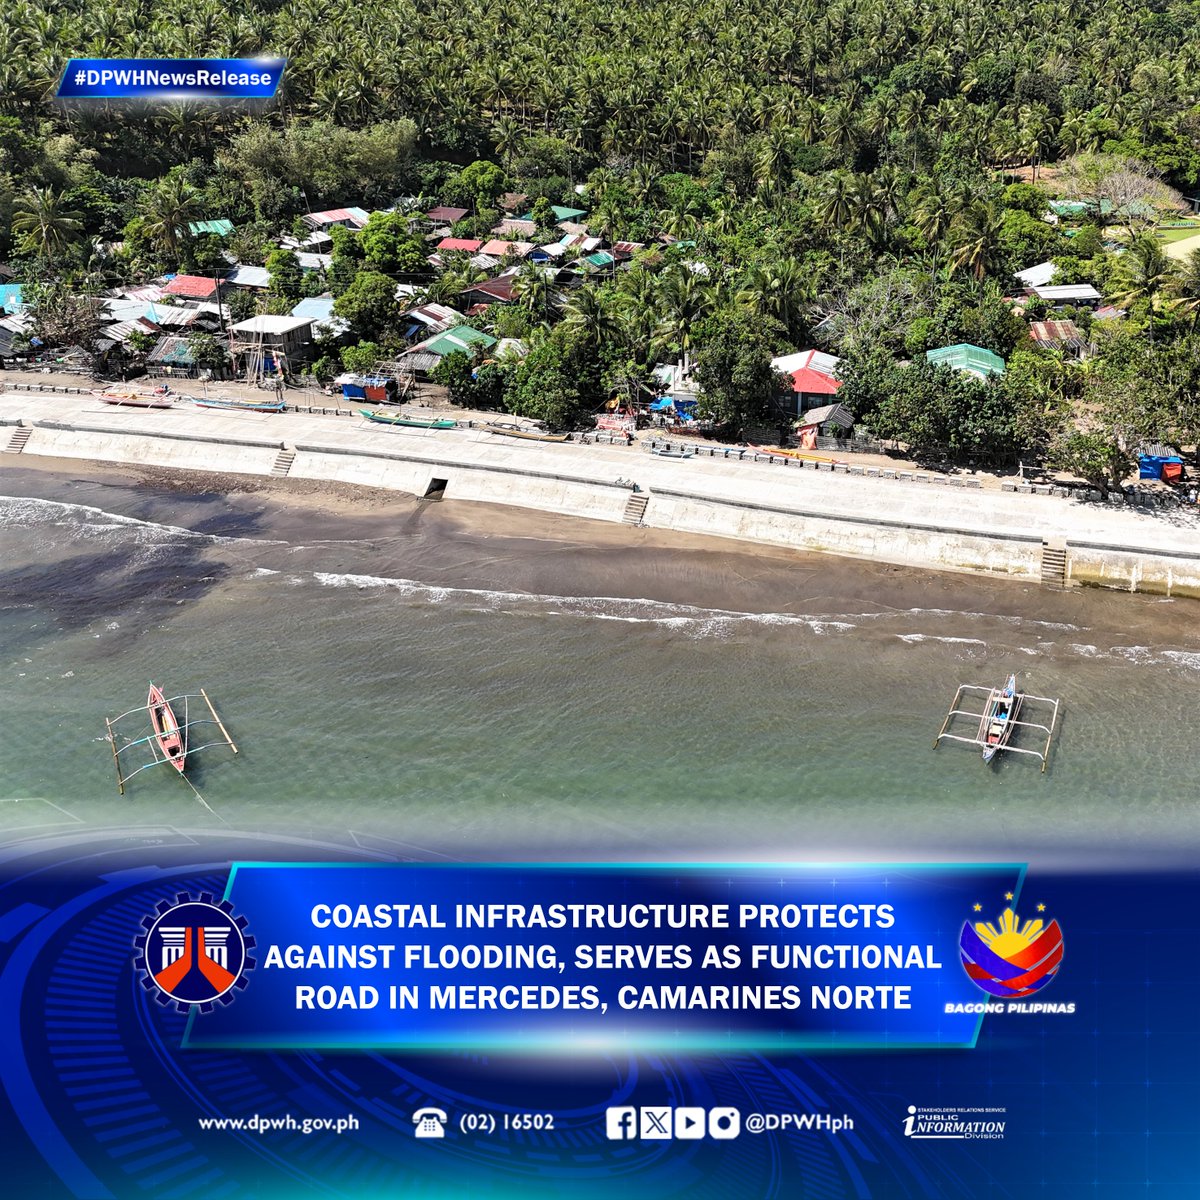 Coastal Infrastructure Protects Against Flooding, Serves as Functional Road in Mercedes, Camarines Norte | Full Story: dpwh.gov.ph/dpwh/news/33465 #DPWH #BuildBetterMore #BagongPilipinas